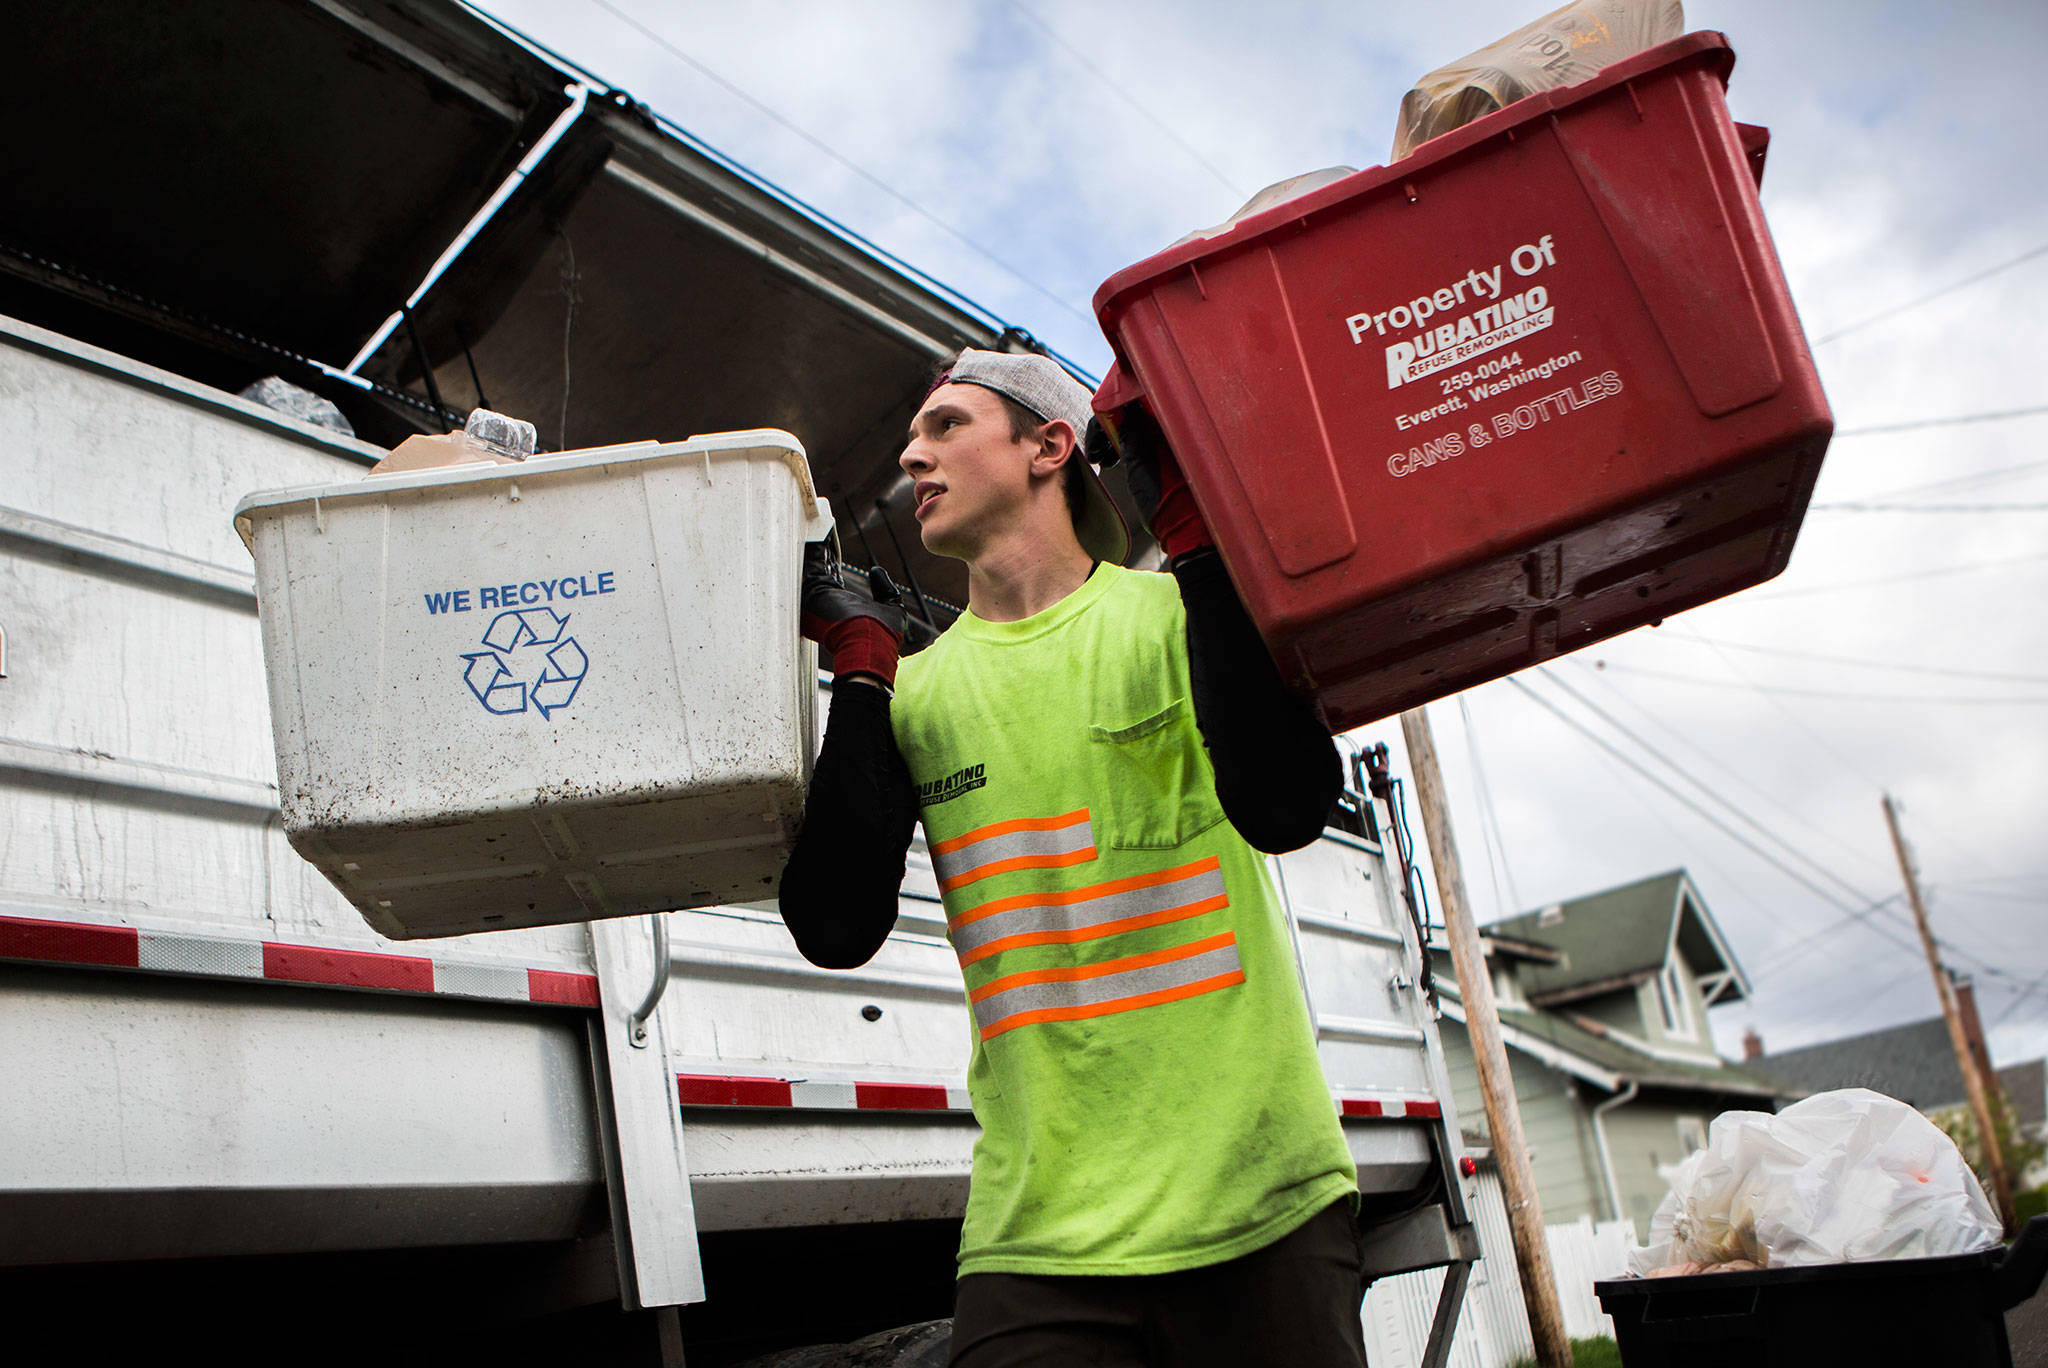 Olivia Vanni / The Herald                                Jeremy Youngren, 20, an employee of Rubatino Refuse Removal, carries two recycling bins to his truck during his route on Wednesday in Everett.